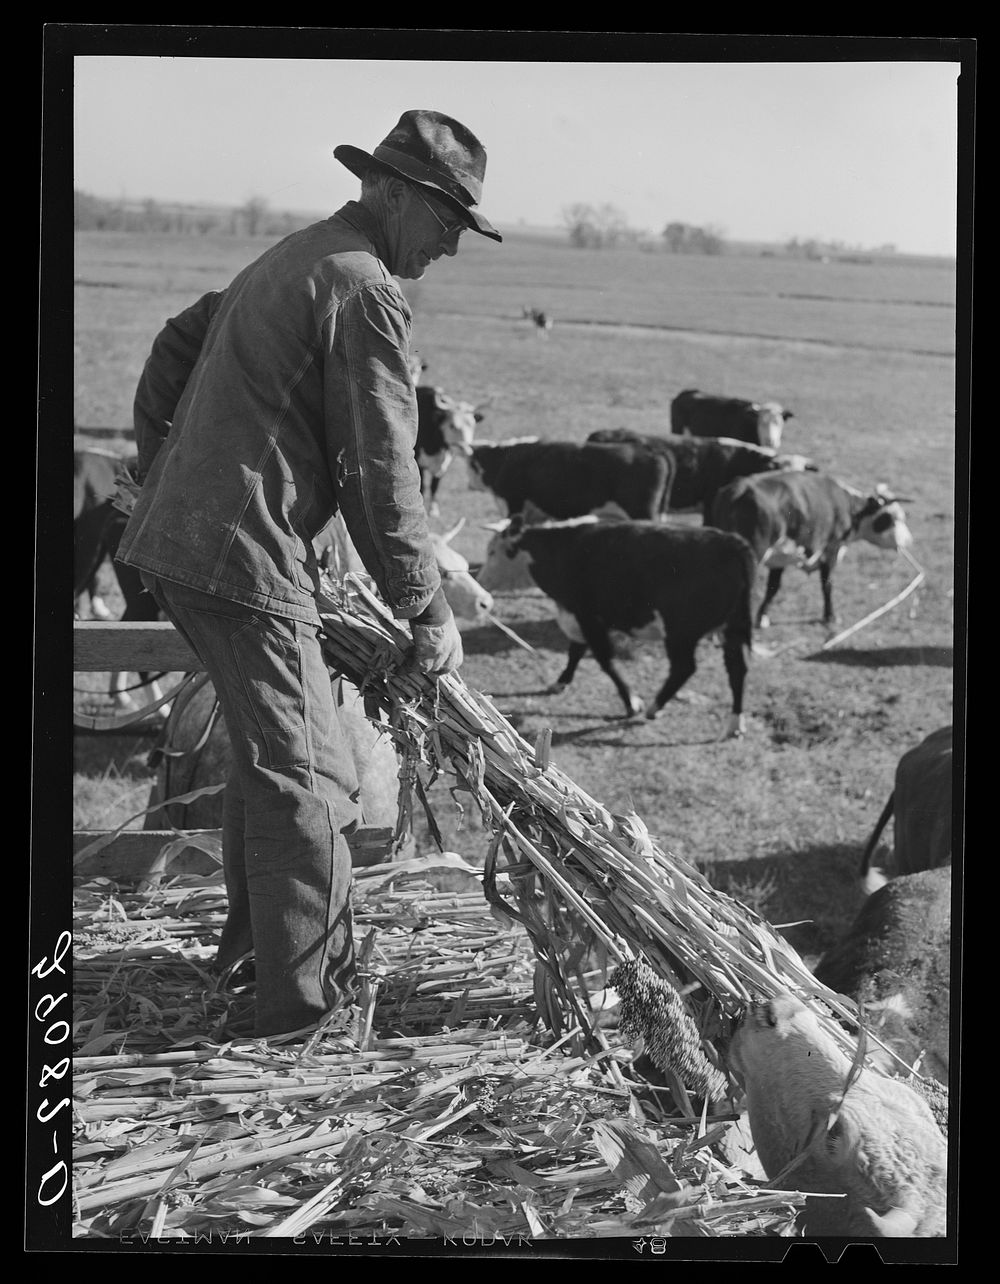 Feeding Hereford cattle. Bois d'Arc Cooperative, Osage Farms, Missouri. Sourced from the Library of Congress.